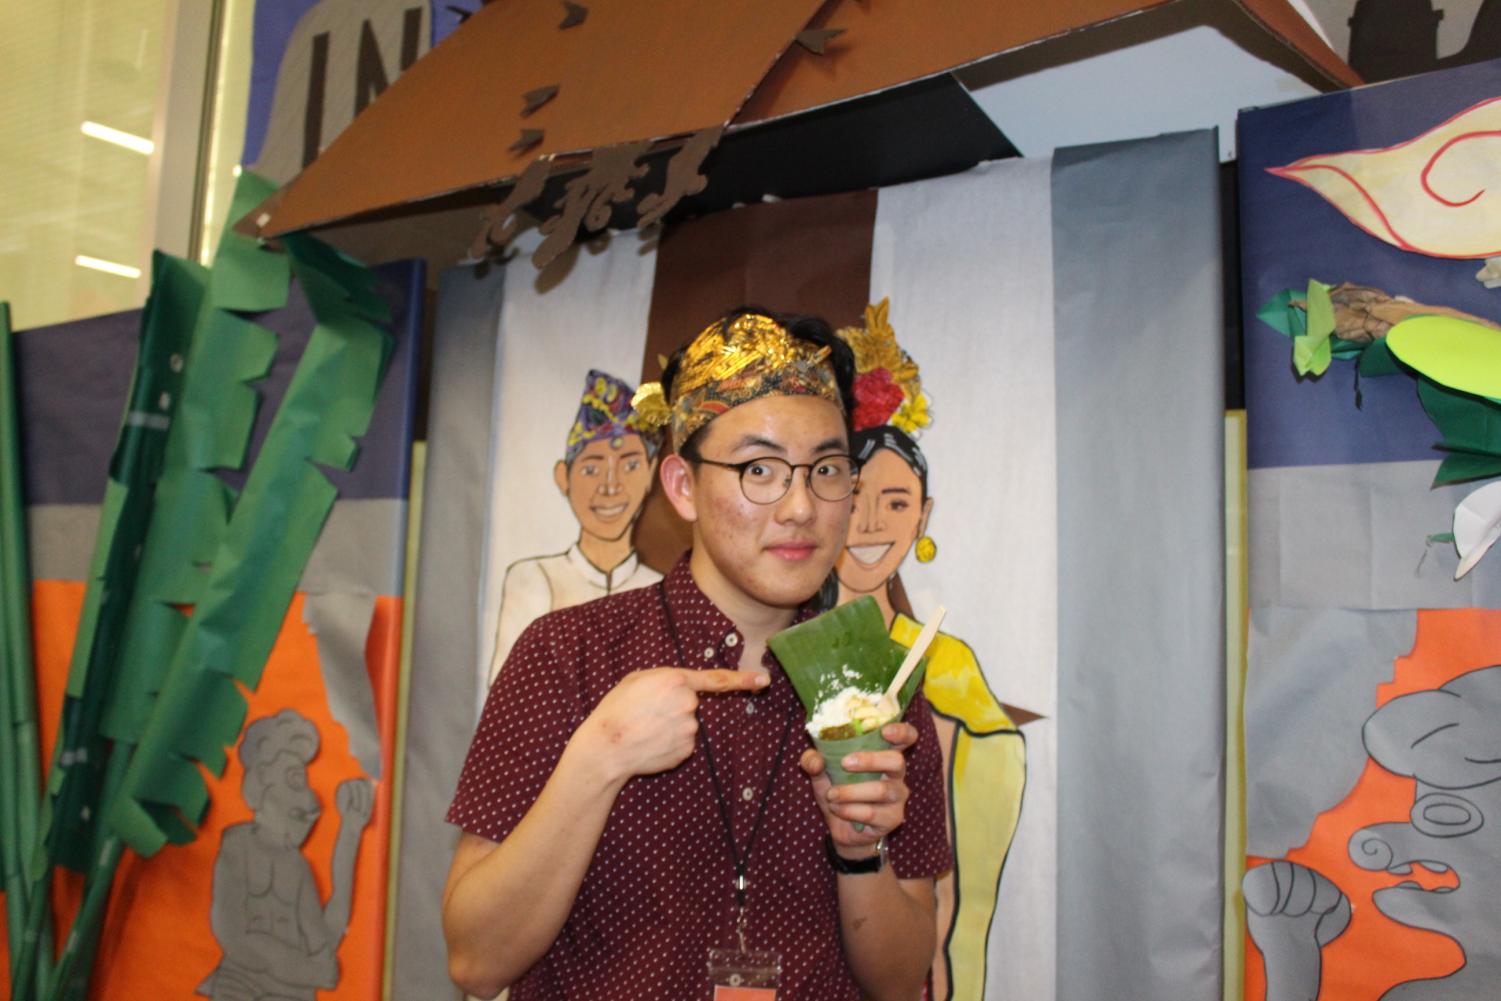 Dylan Chae '20 serves Jajan Pansa, a Javnese market snack, wrapped in banana leaves and topped with coconut shaving as well as banana slices.